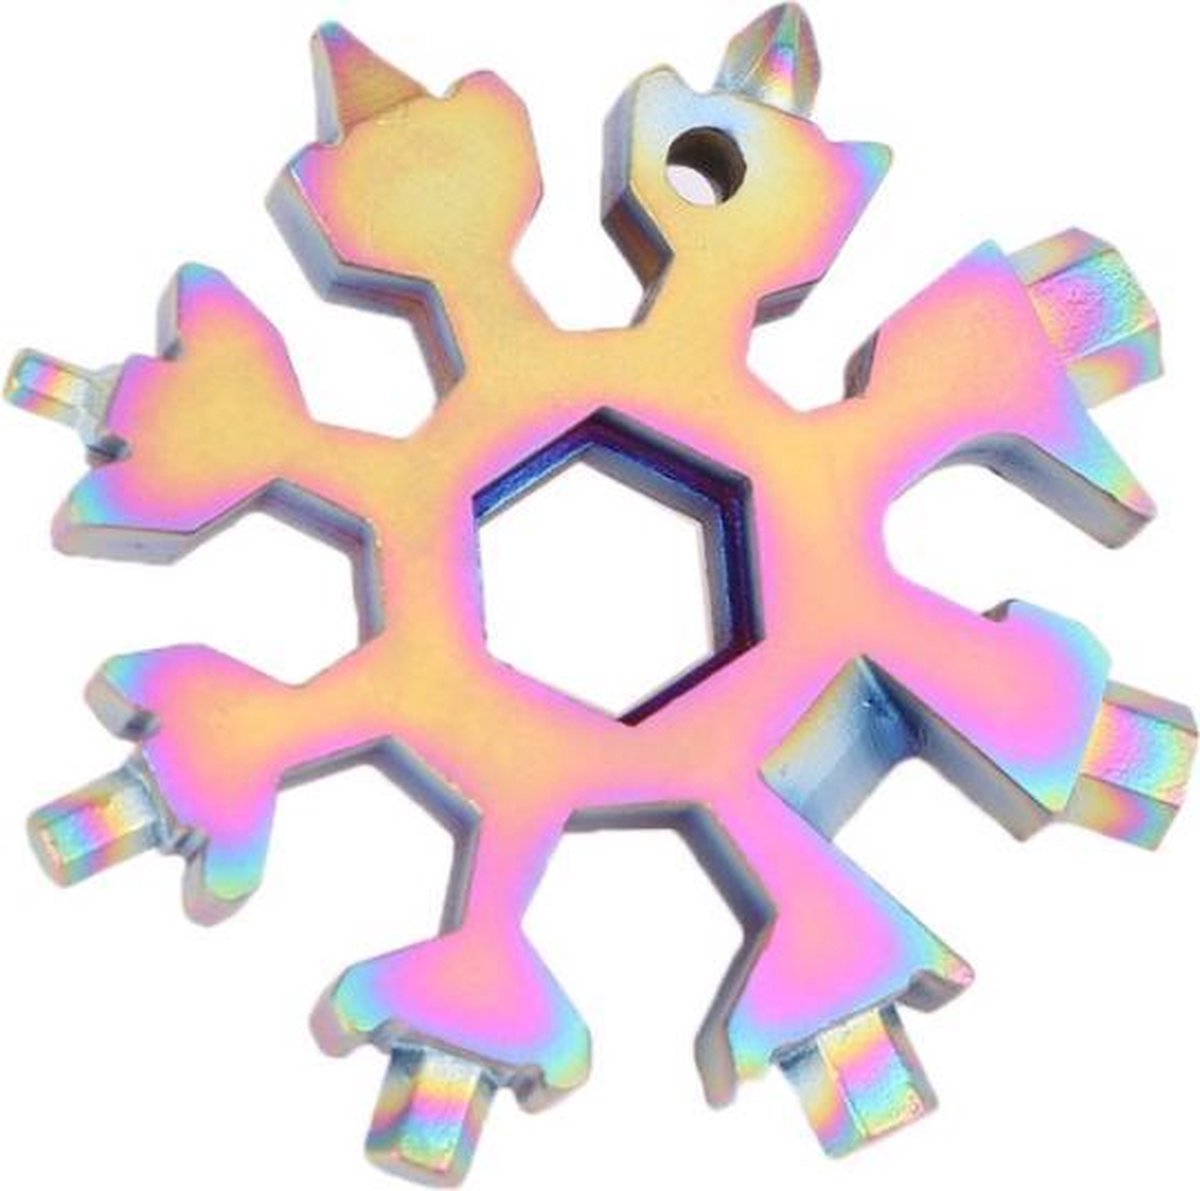 Snowflake 18-in-1